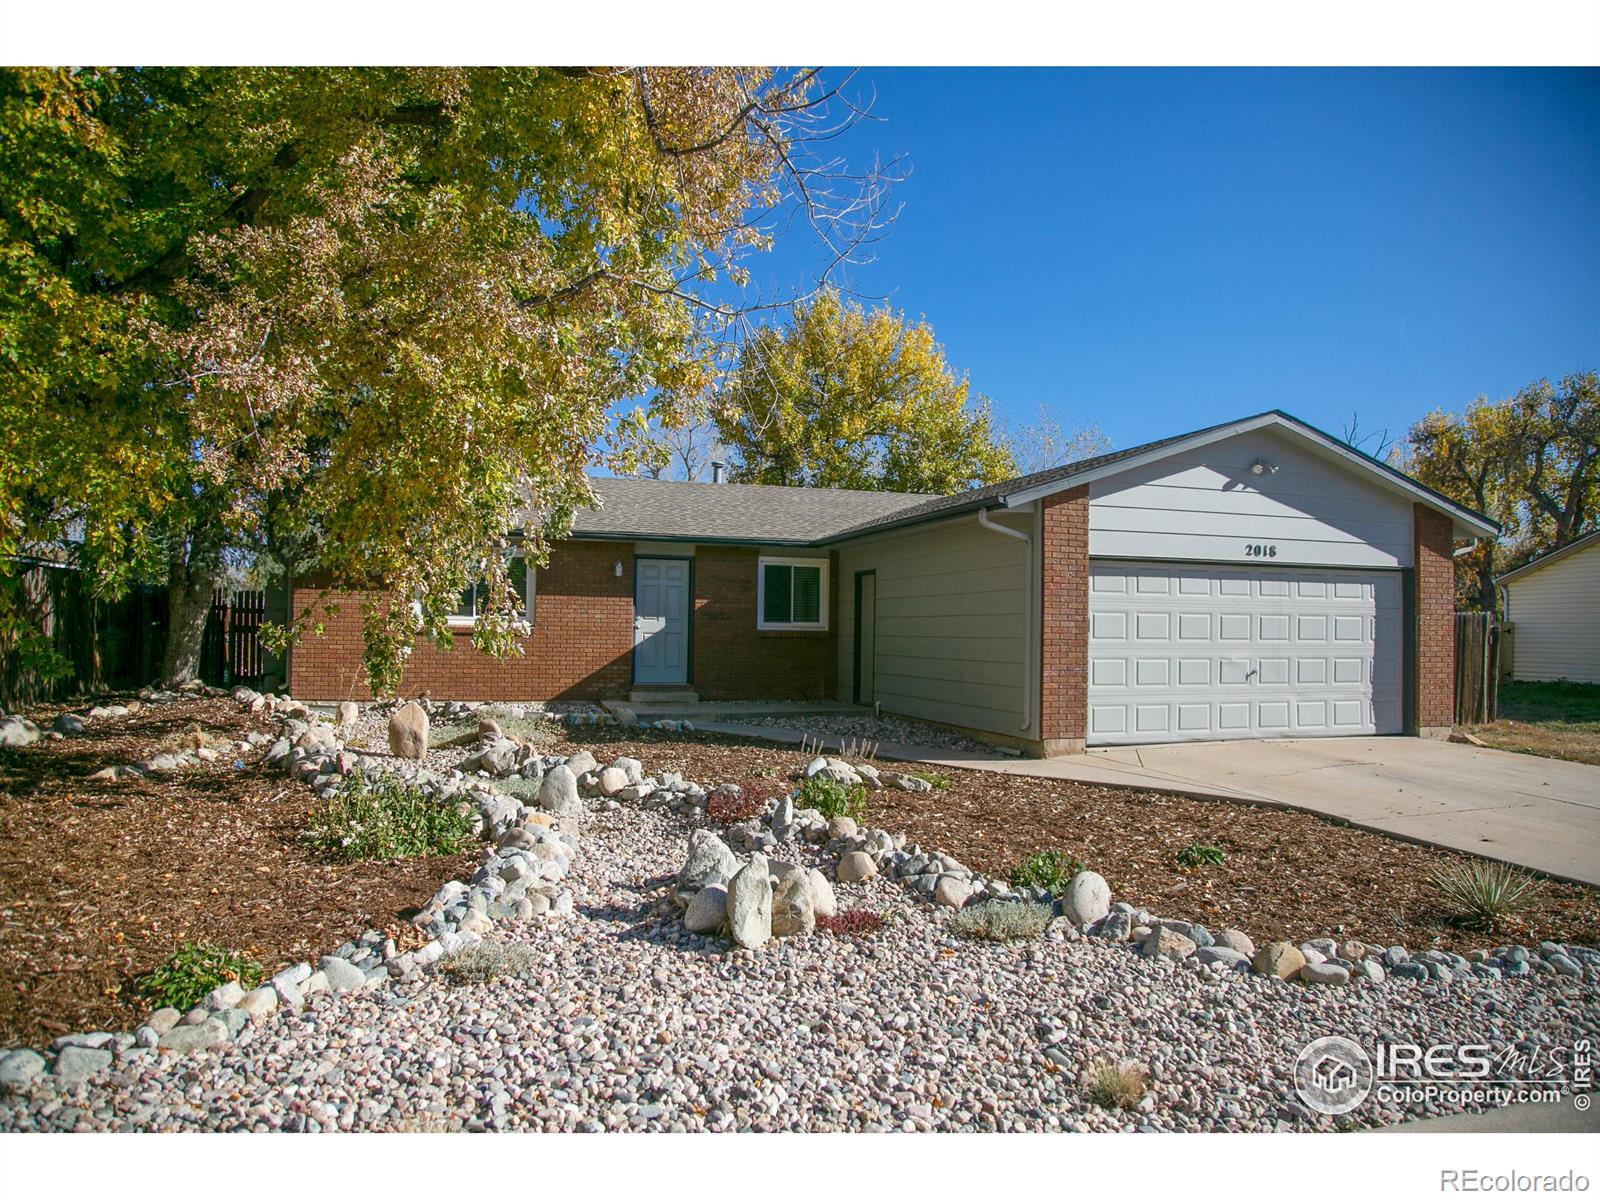 CMA Image for 2237  suffolk street,Fort Collins, Colorado